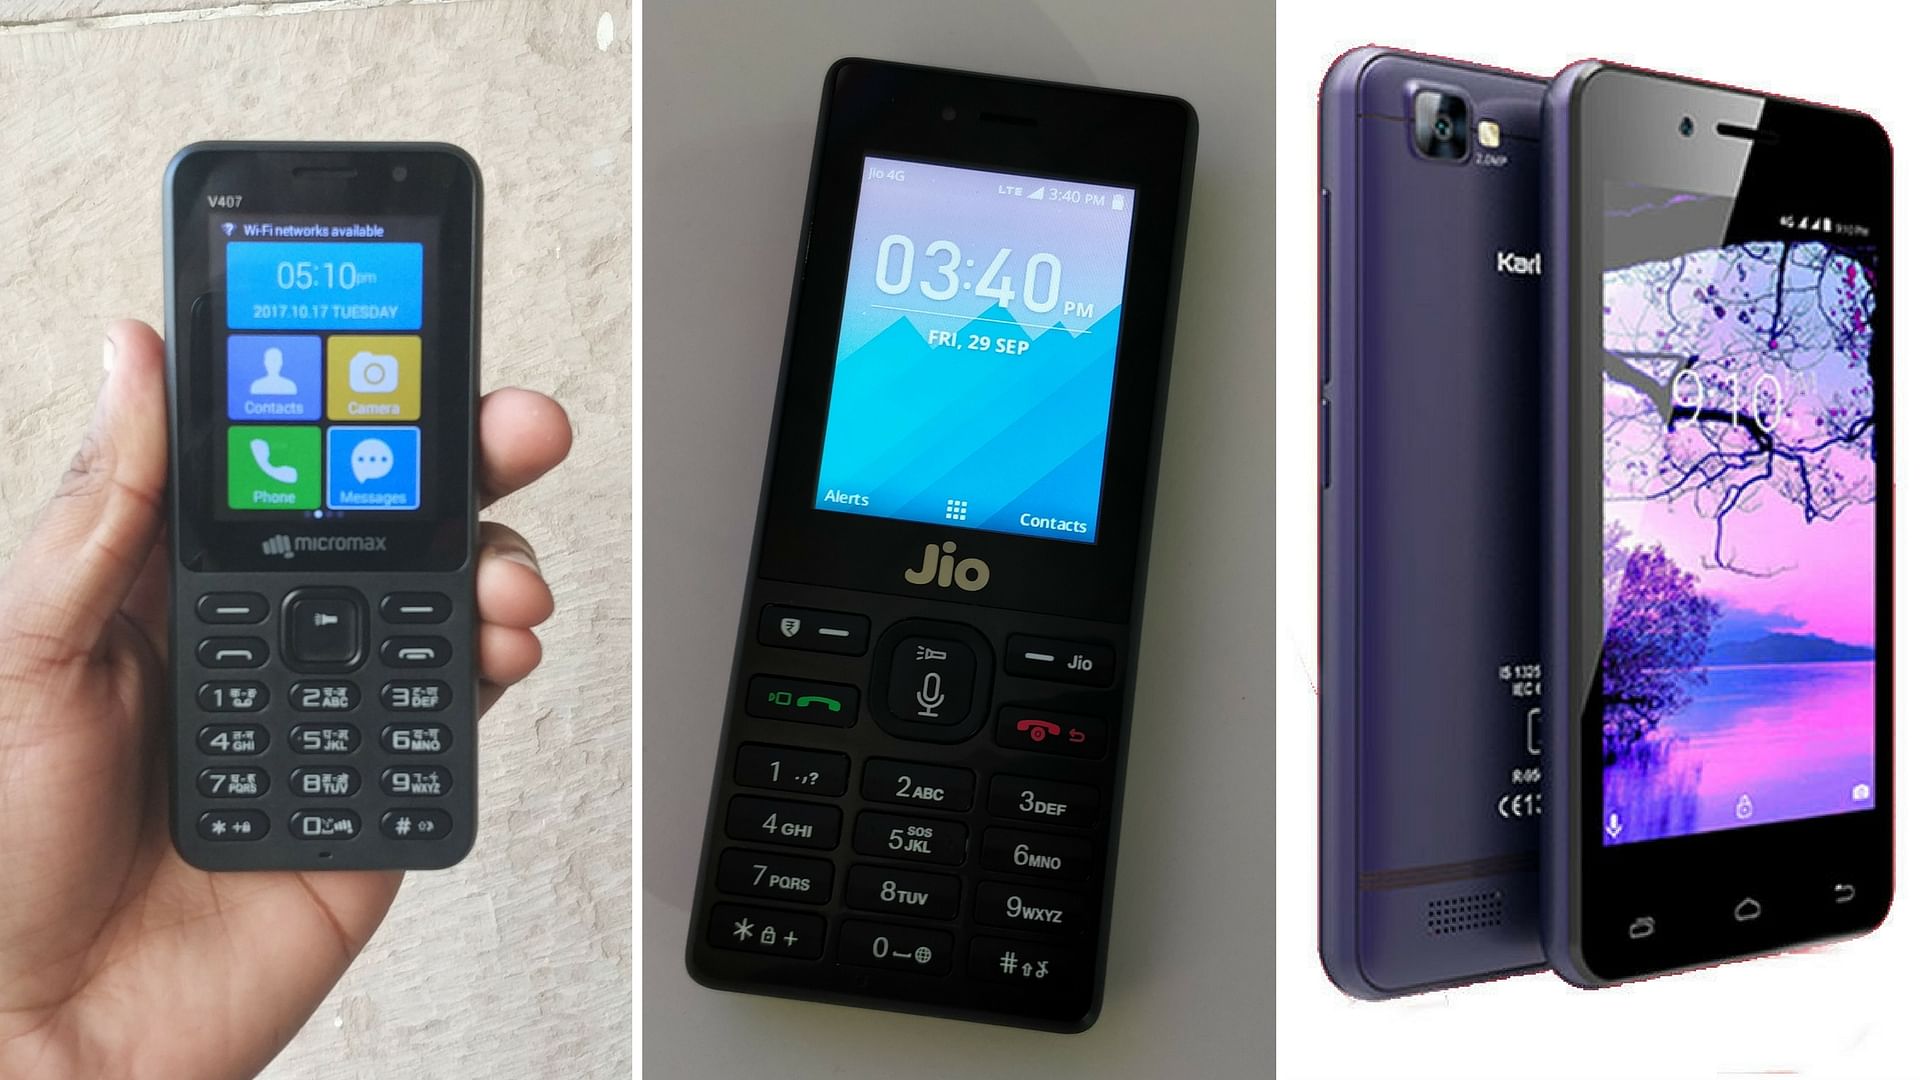 Reliance JioPhone has competition now. 